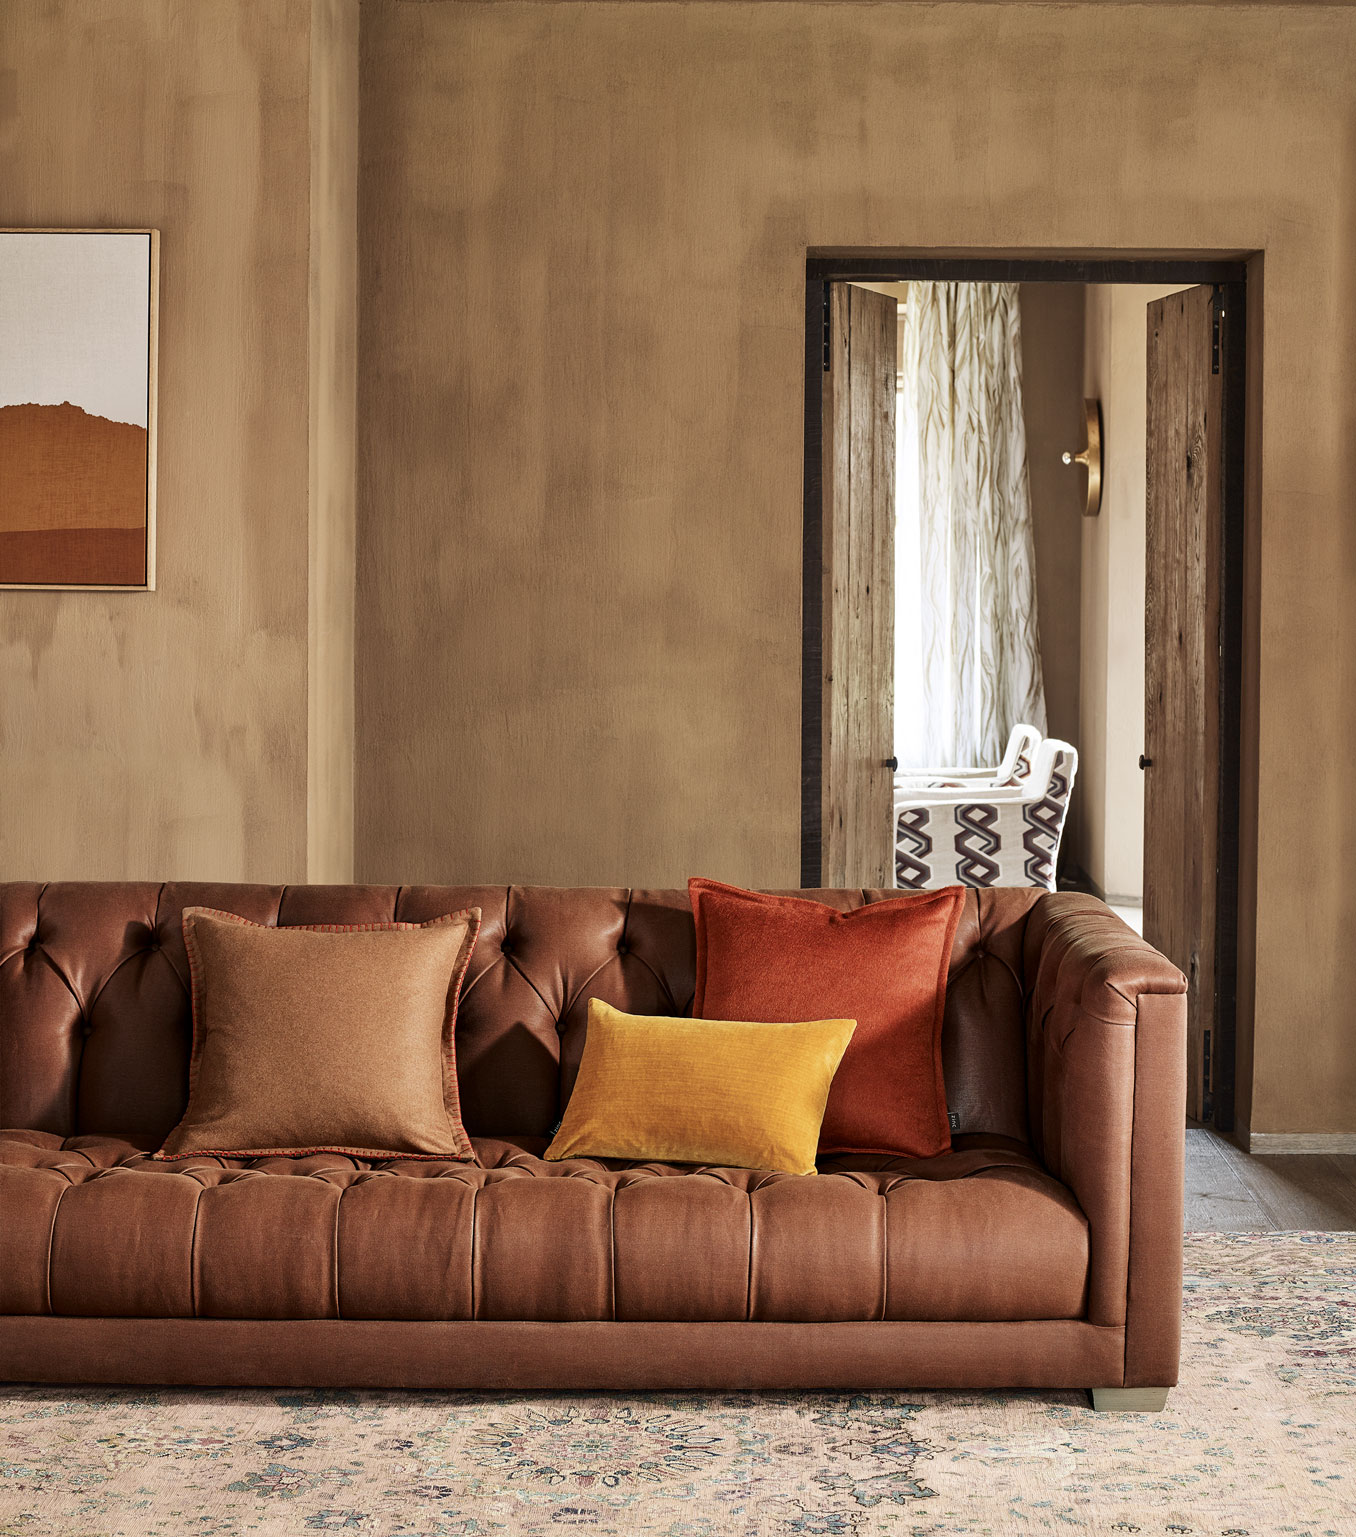 Earthy tones and textures in a living room